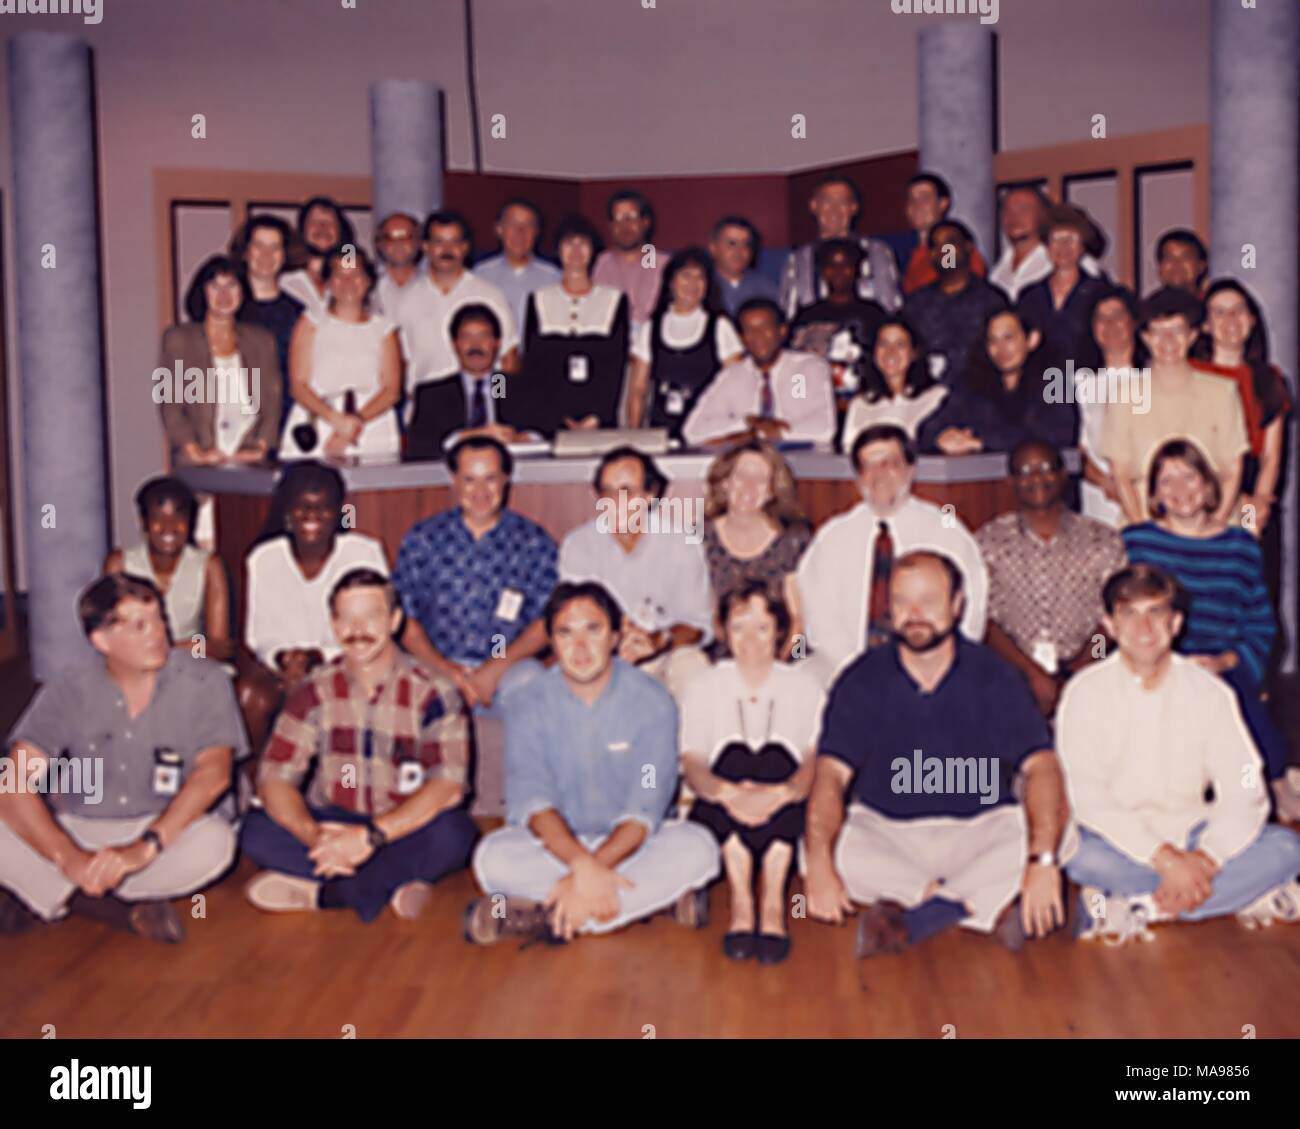 Dr William Atkinson instructor at the National Immunization Program and the broadcast moderator Joe Washington sitting amongst their colleagues, 1994. Image courtesy Centers for Disease Control (CDC). () Stock Photo